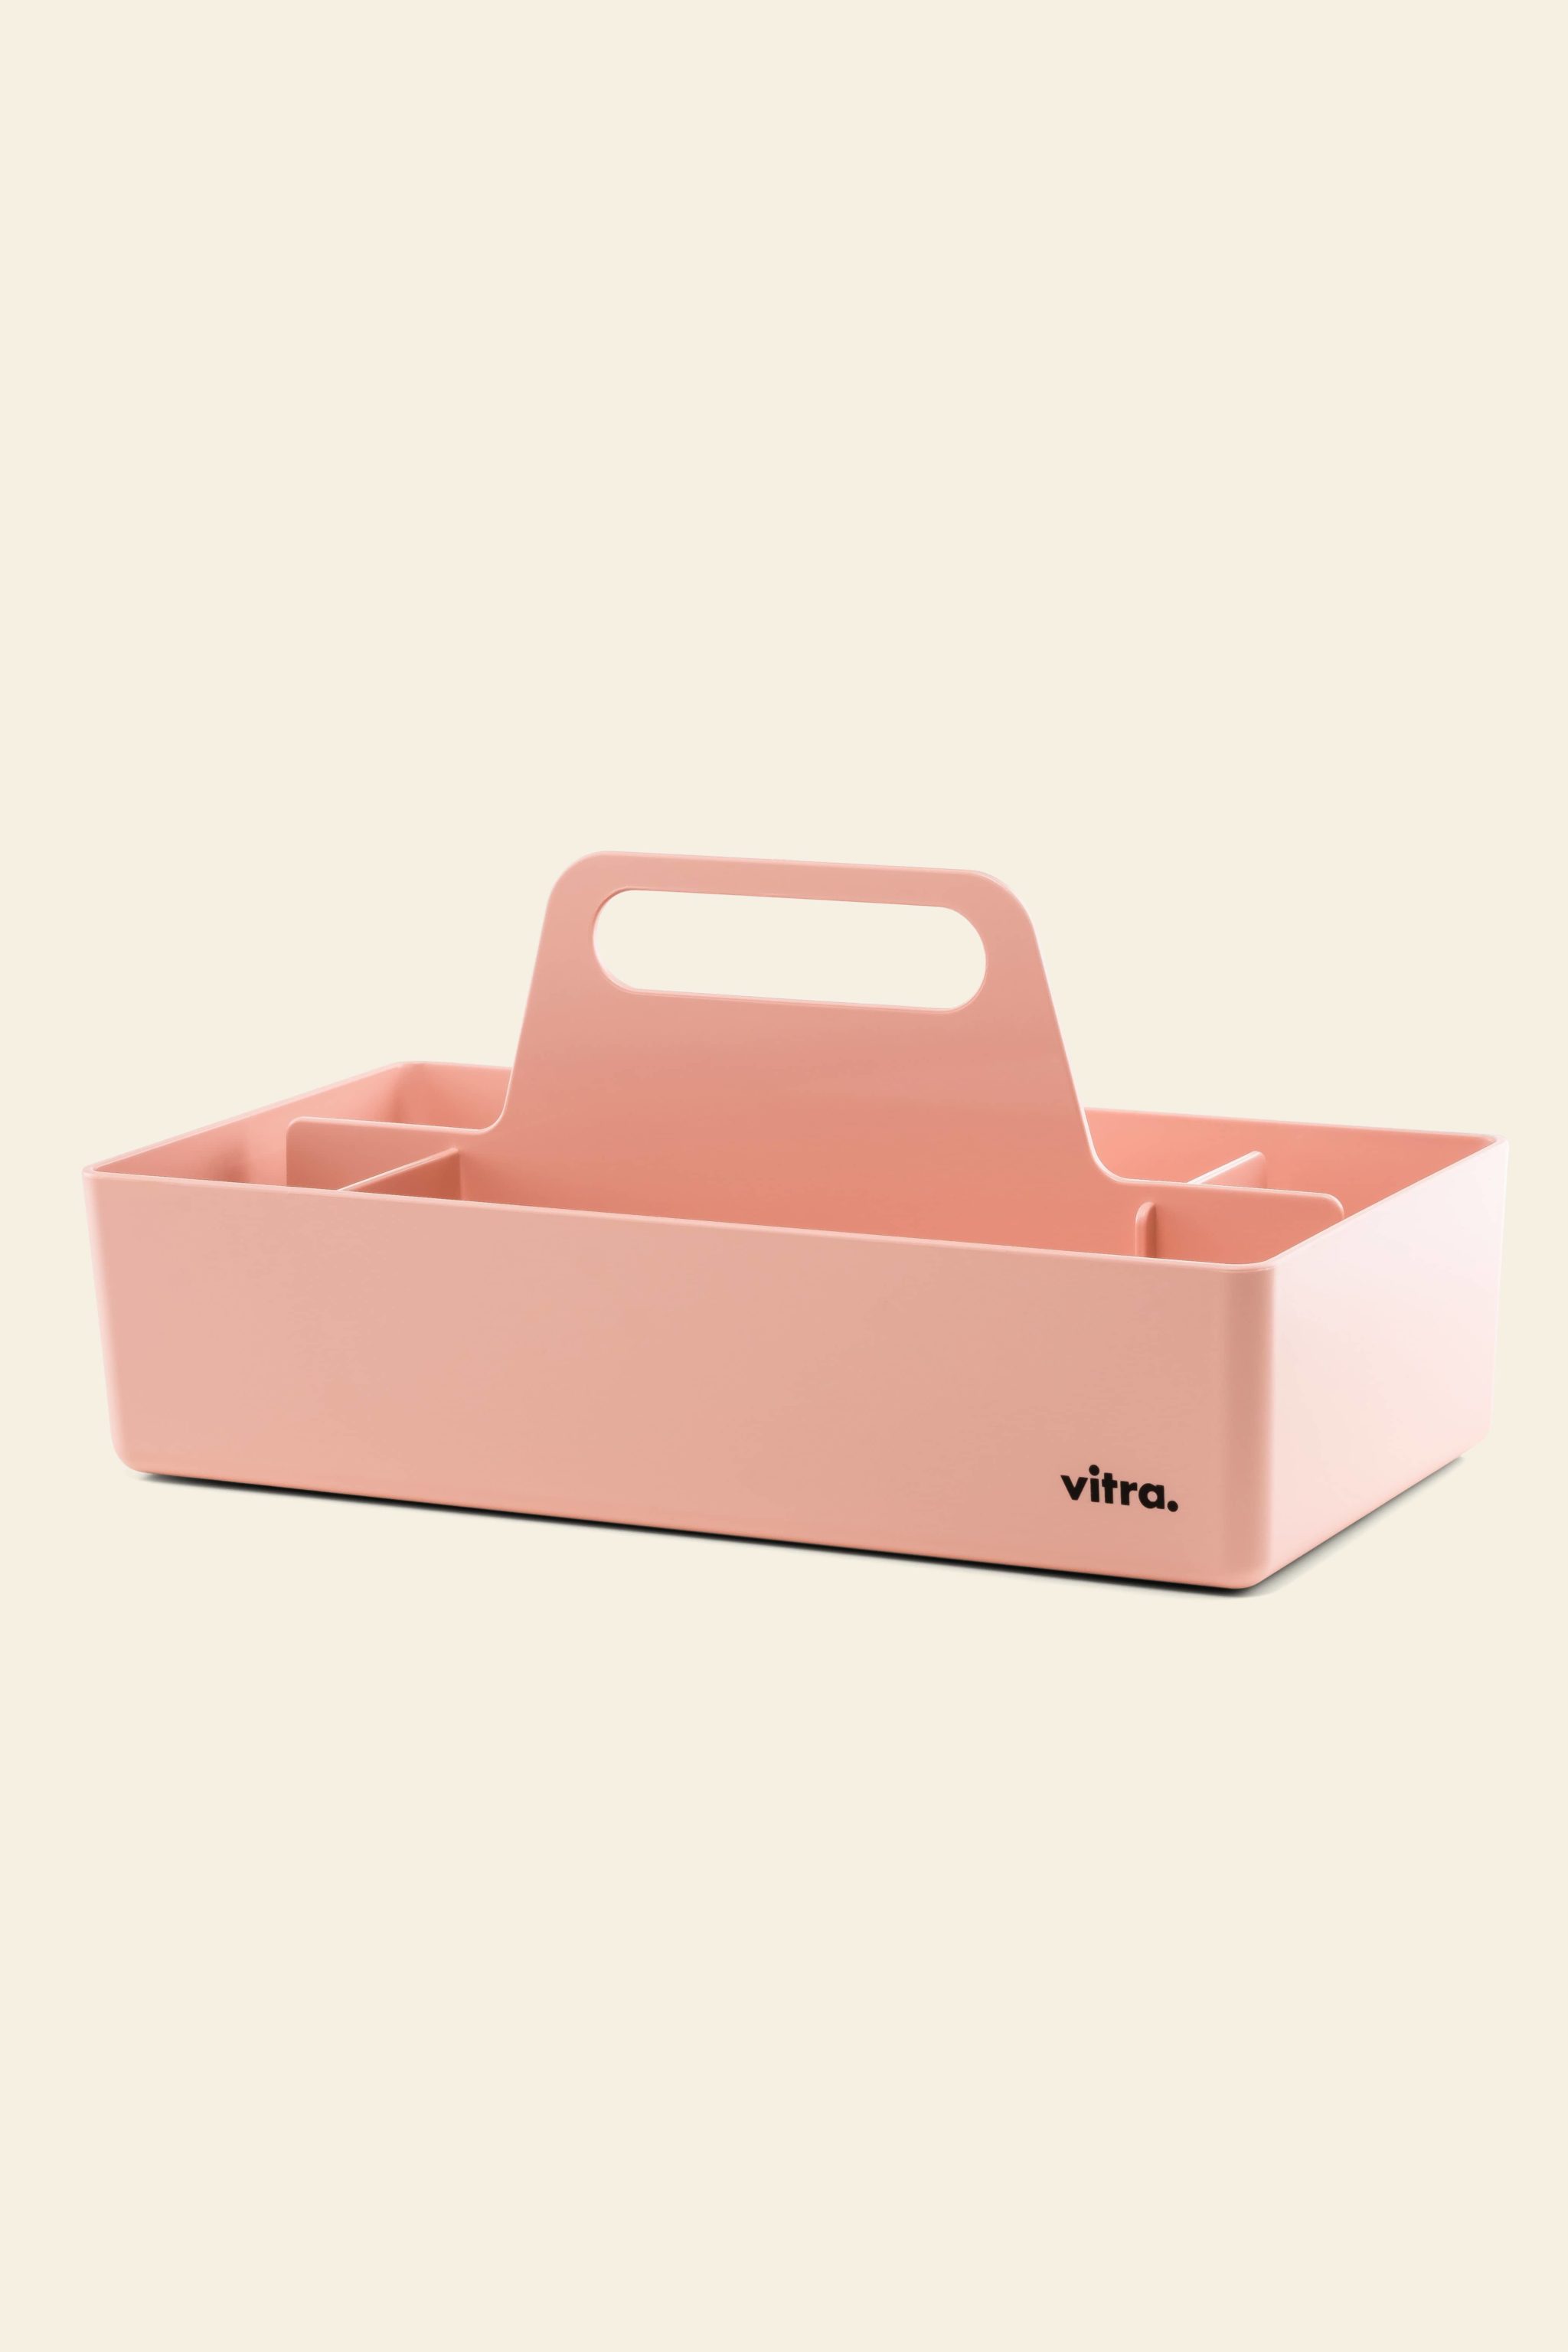 Vitra Toolbox RE Pale Rose 1